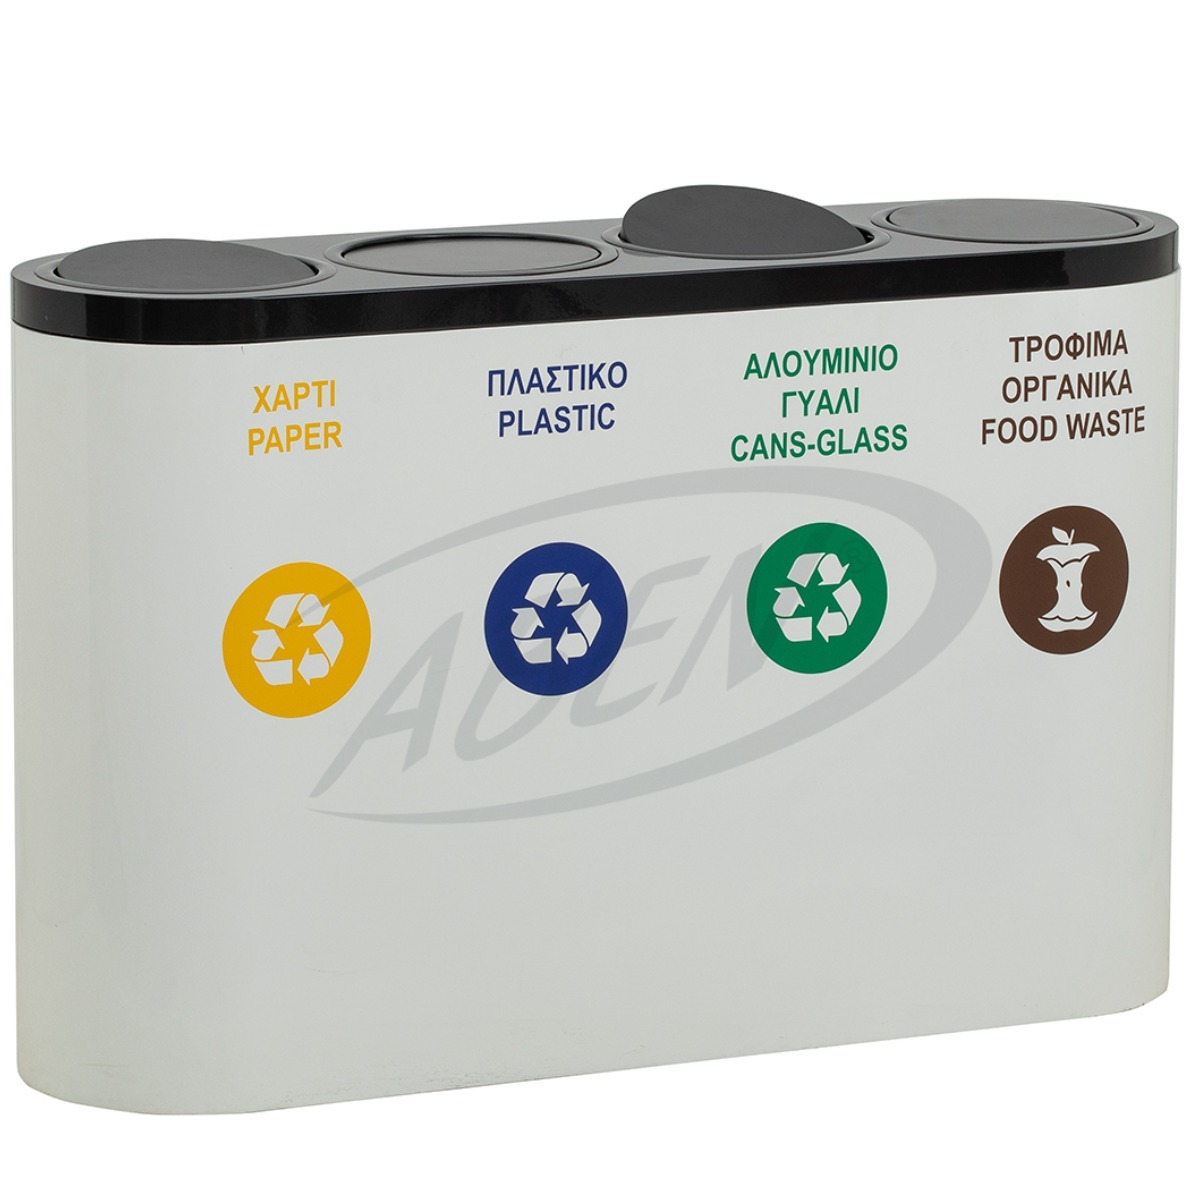 AB-727 4’Part Recycle Bin product logo